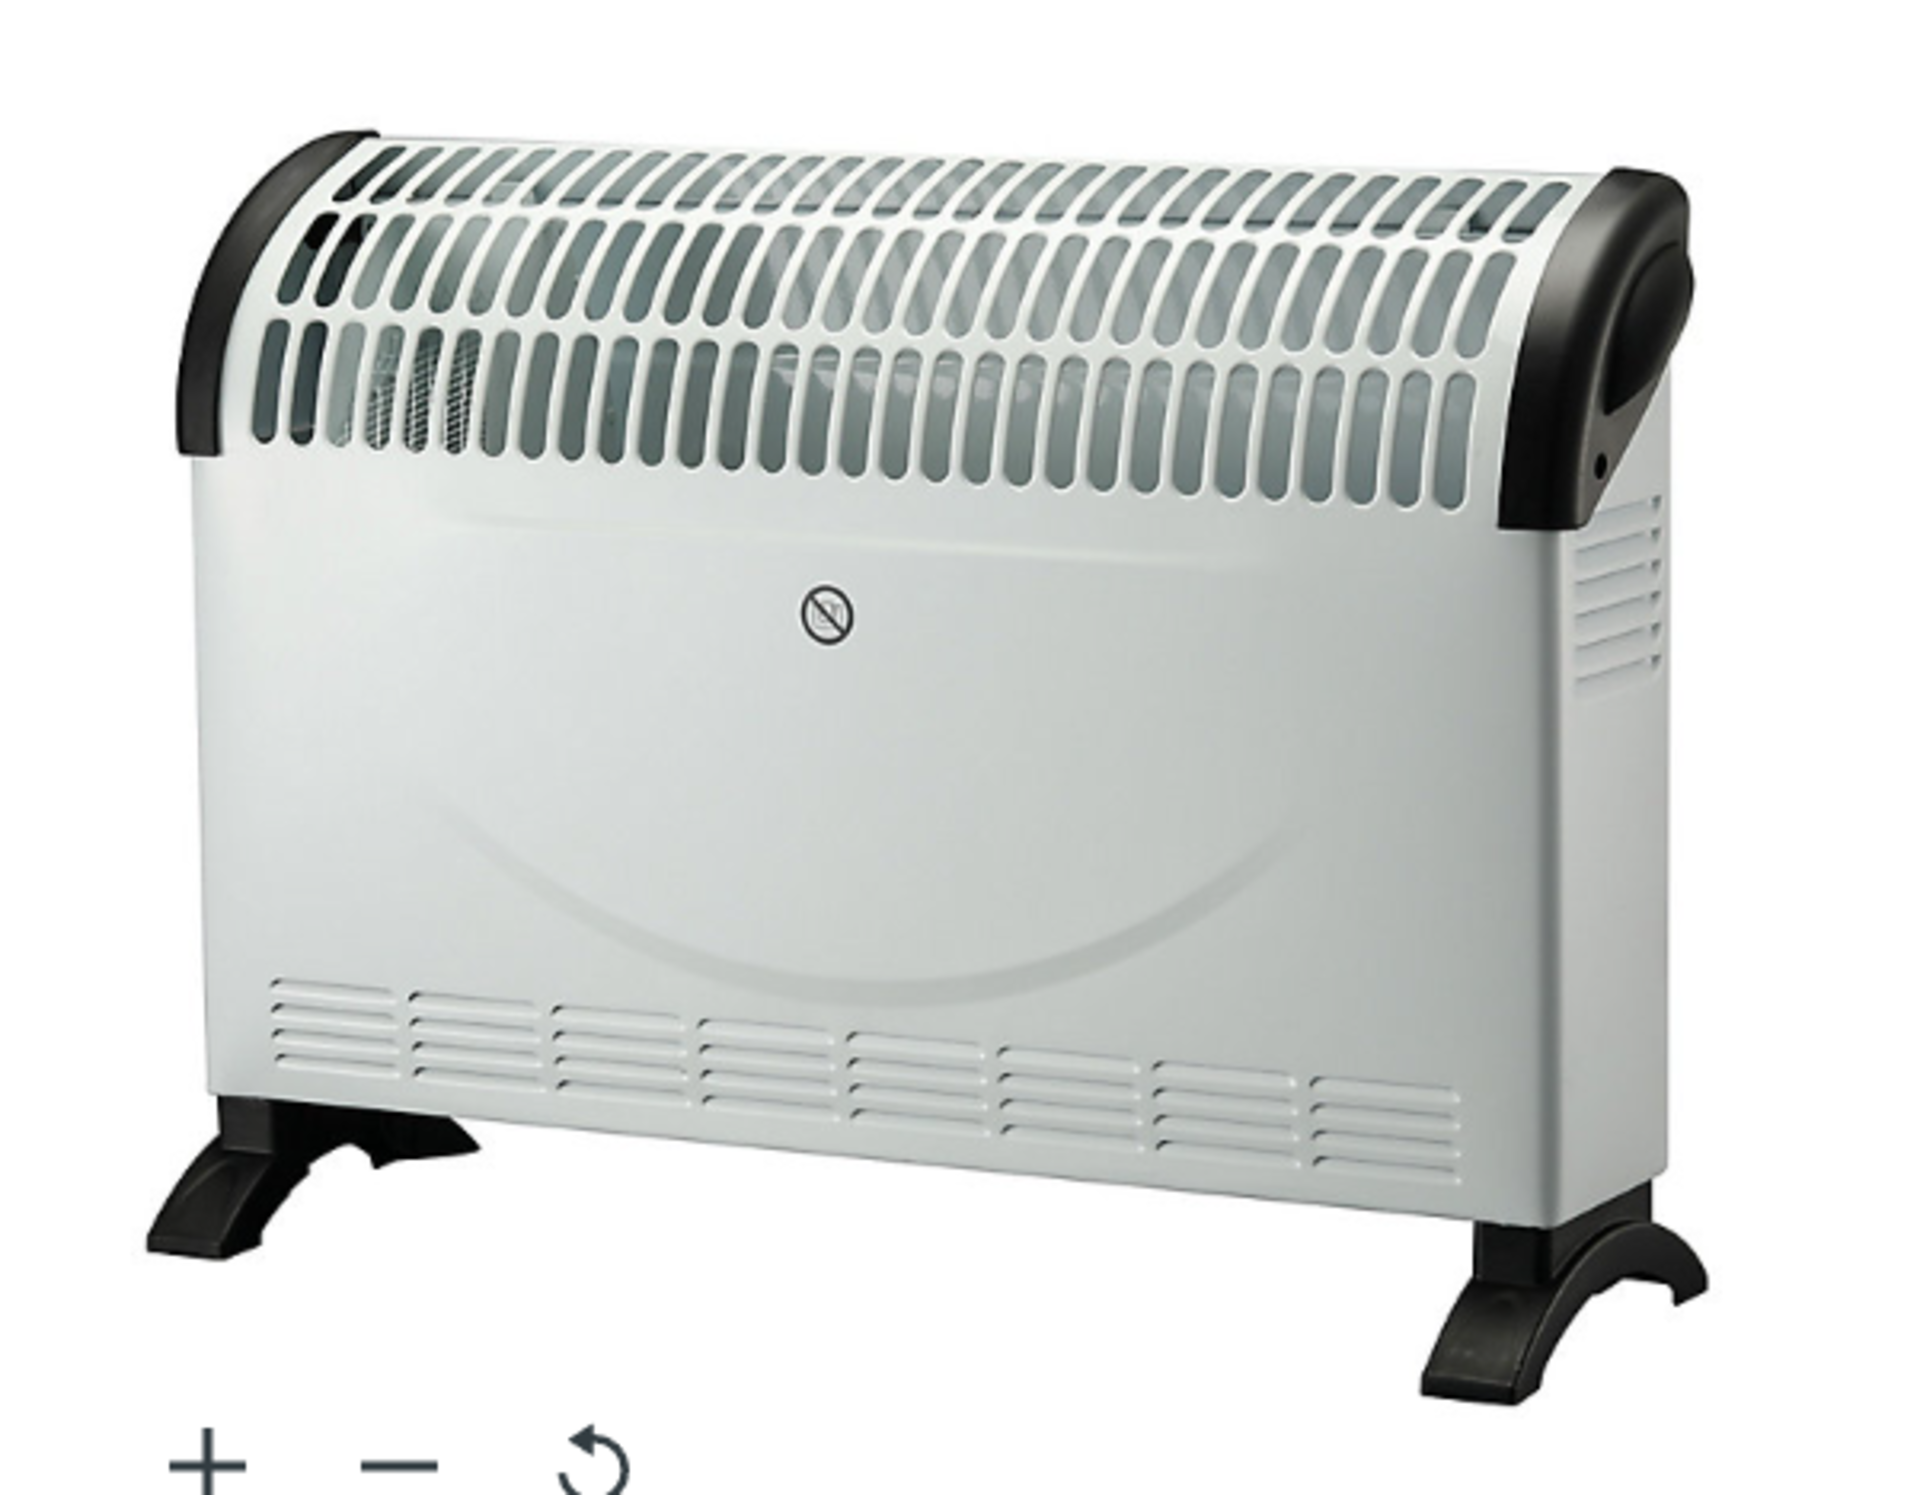 5 x 2000W White Convector heater. - ER32. Keep warm and cosy with this 2000W freestanding